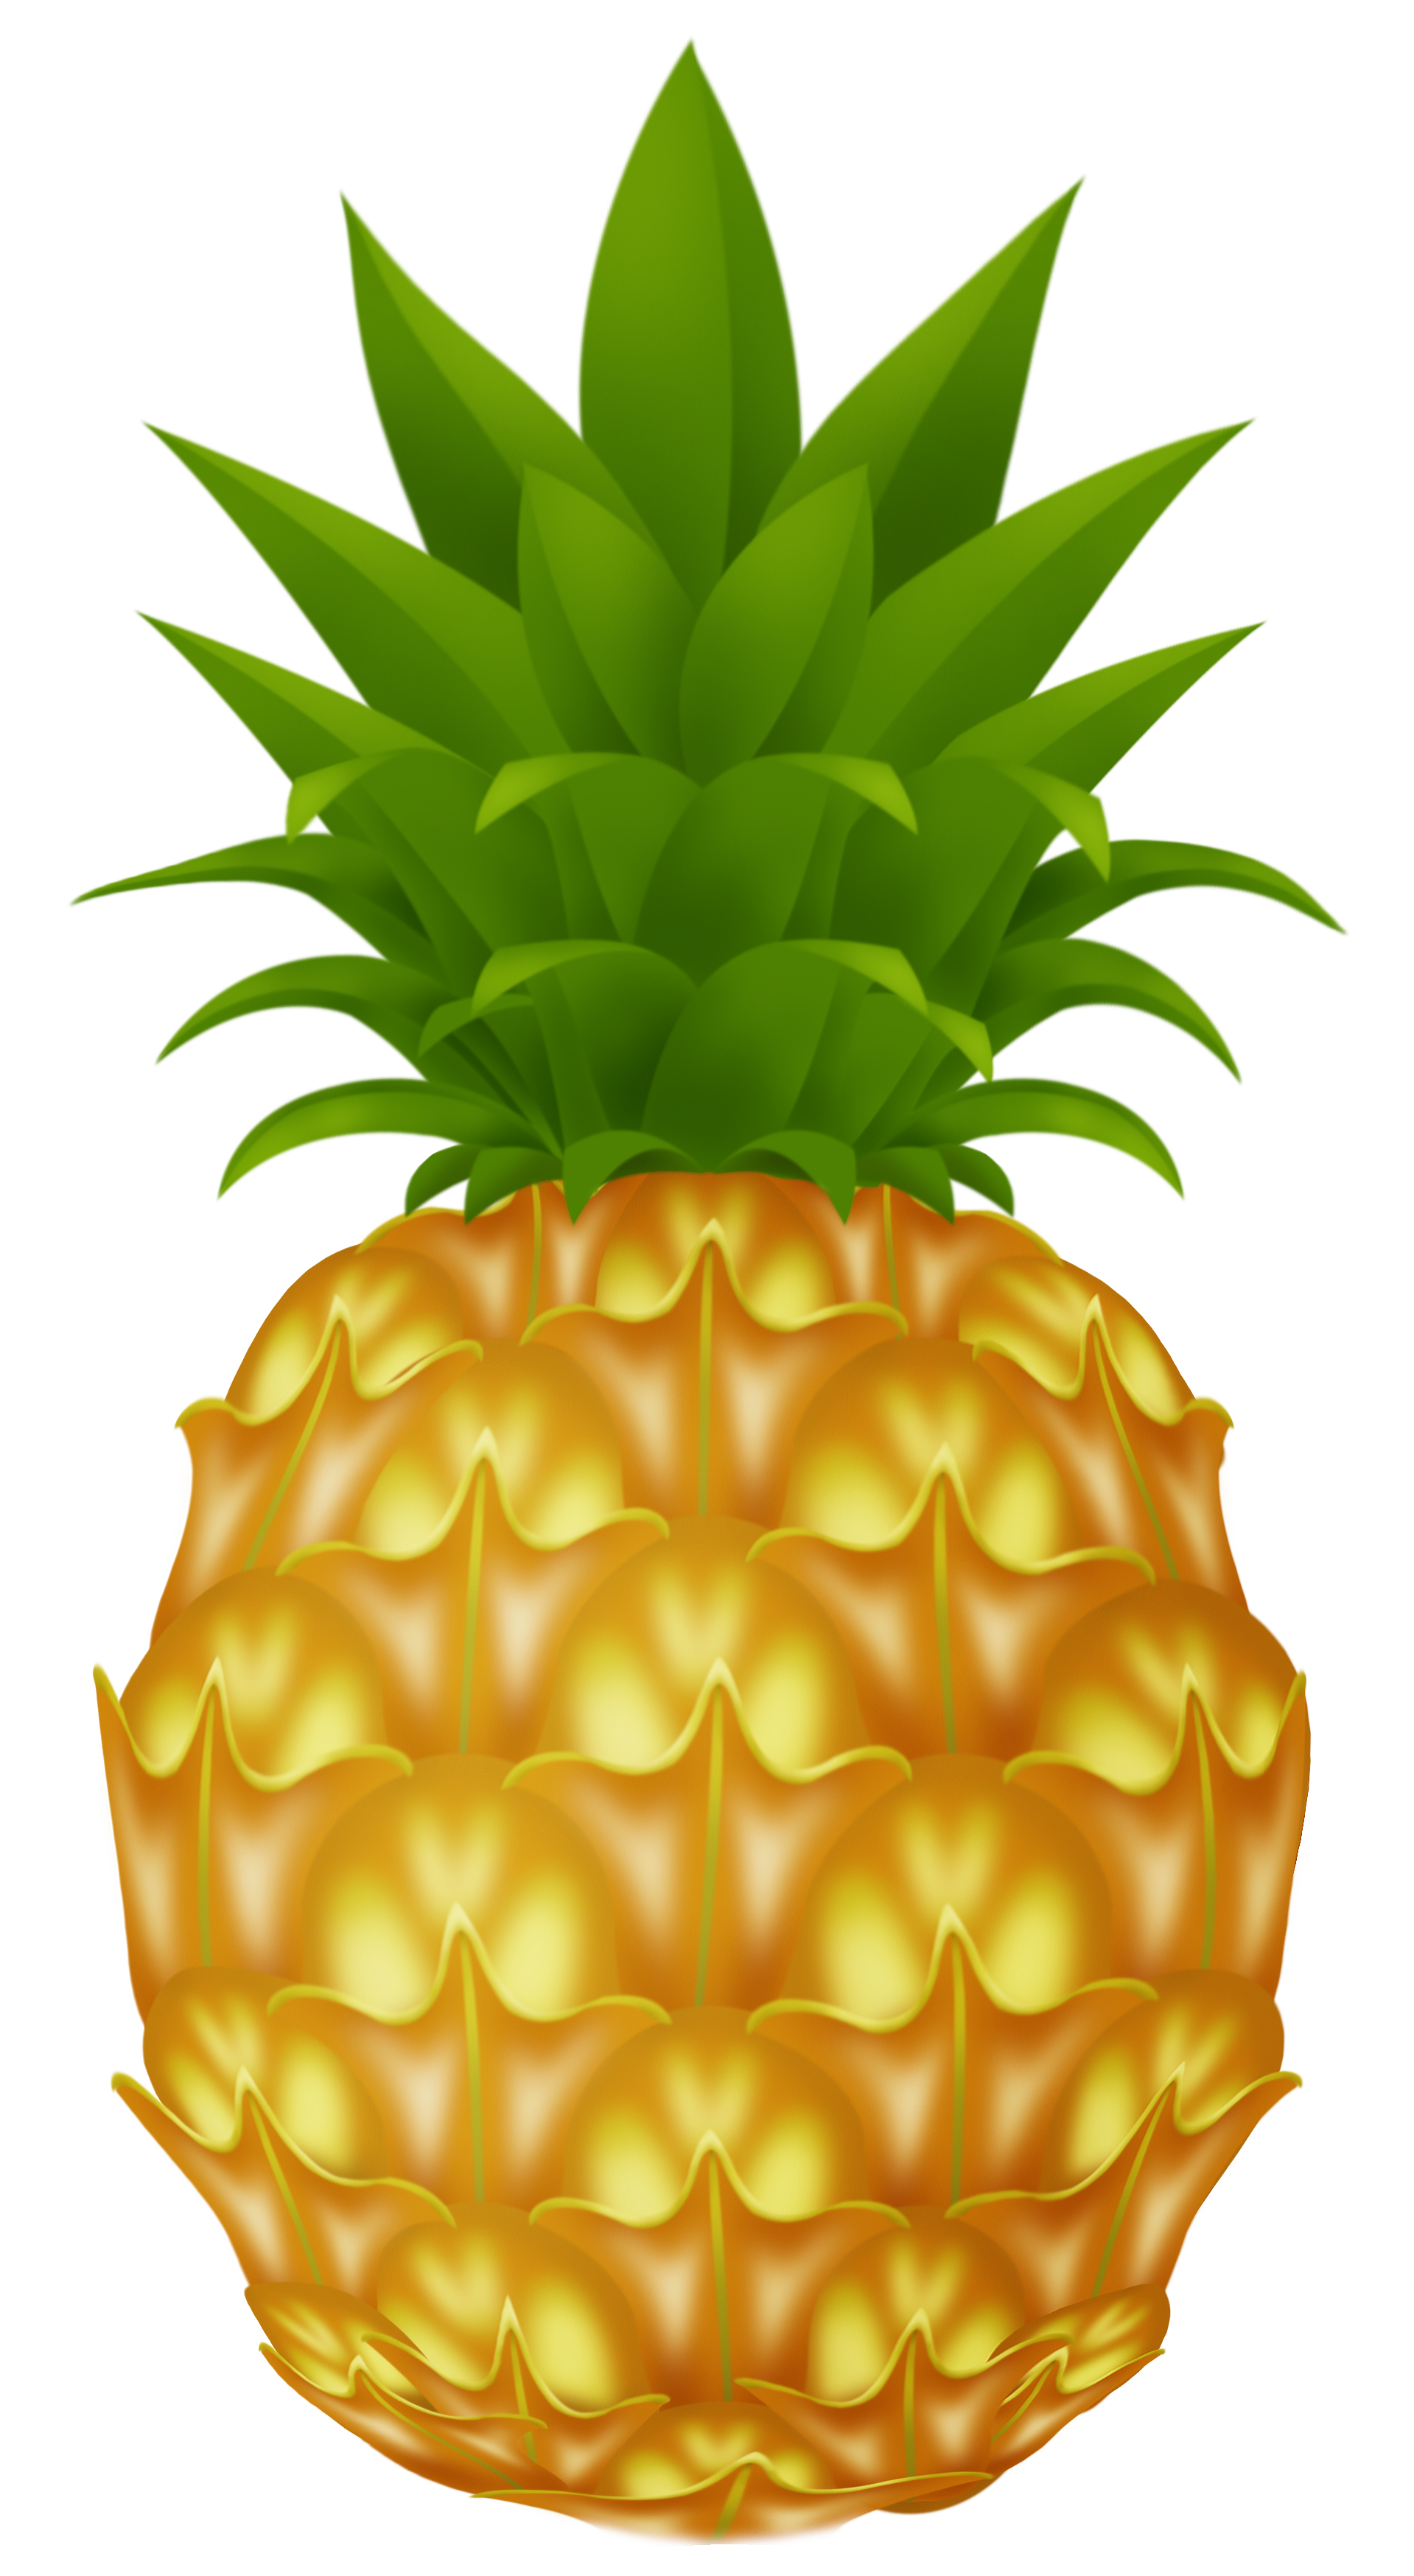 Featured image of post Cartoon Clipart Cartoon Pineapple Images - Featuring over 42,000,000 stock photos, vector clip art images, clipart pictures, background graphics and clipart graphic images.